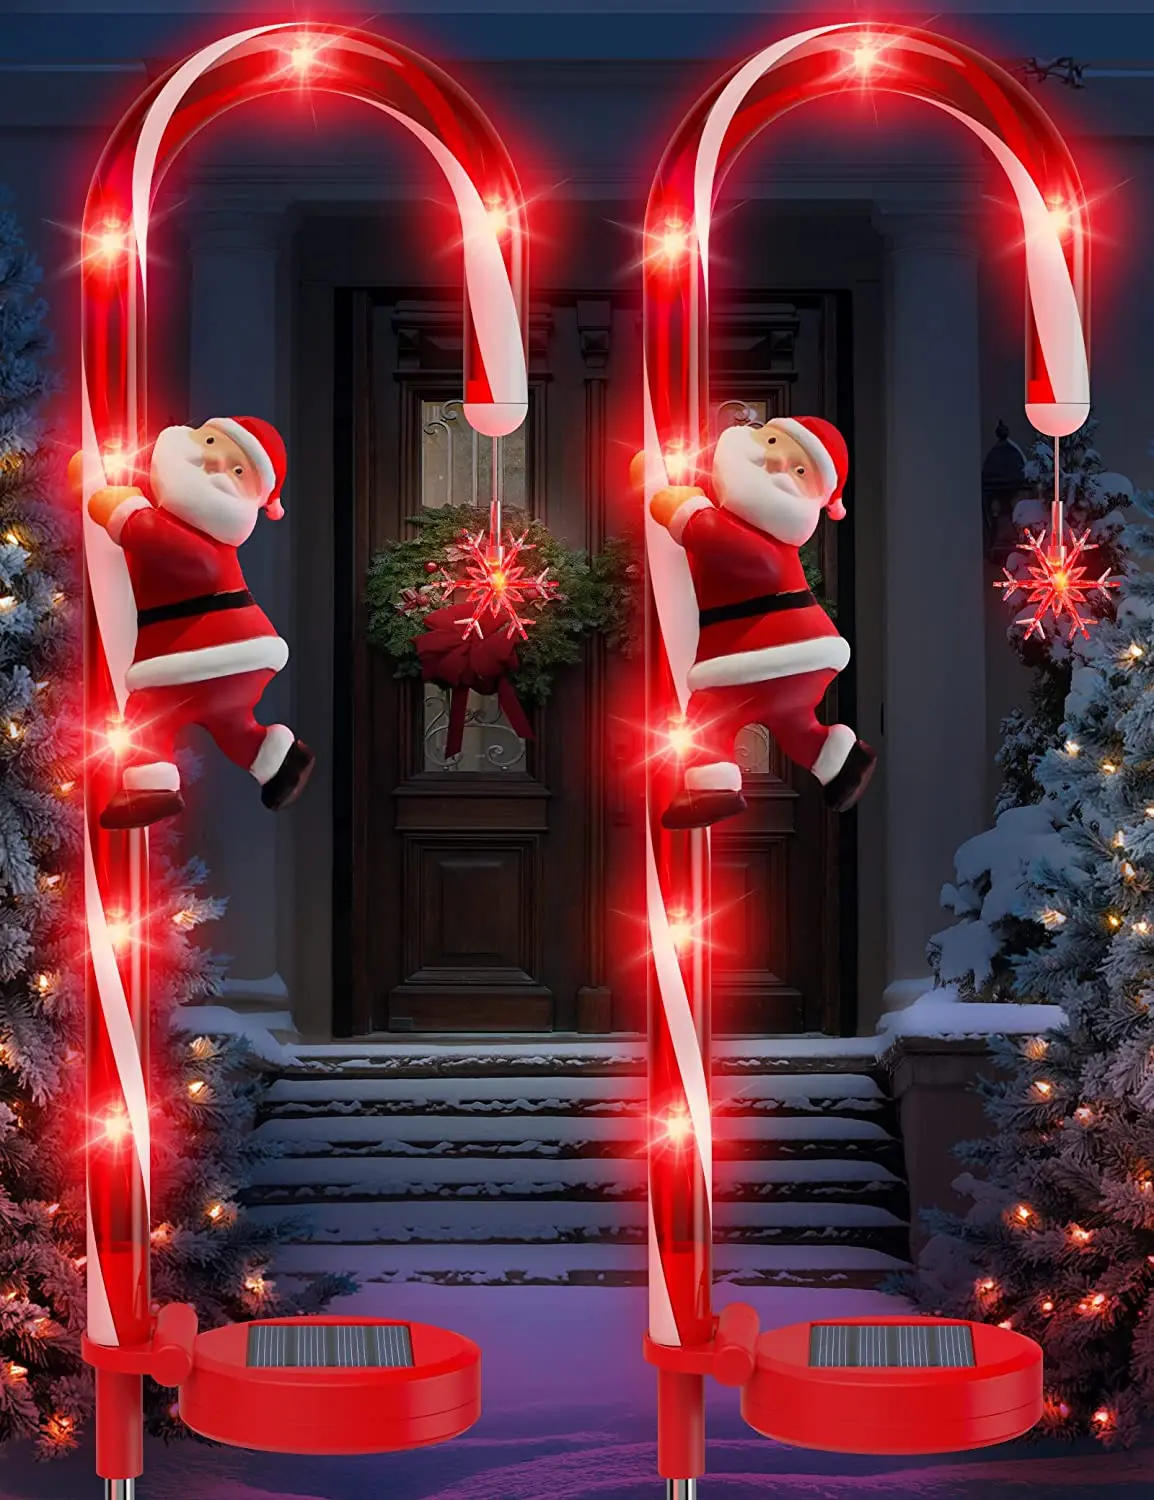 Christmas LED Solar Christmas Decoration Candy Cane Sign Lights Outdoor Stake Lights For Road Garden Lawn Lights Christmas Gifts christmas lights outdoor garden decoration lights festive christmas candy cane led lights create indoors outdoors for garden